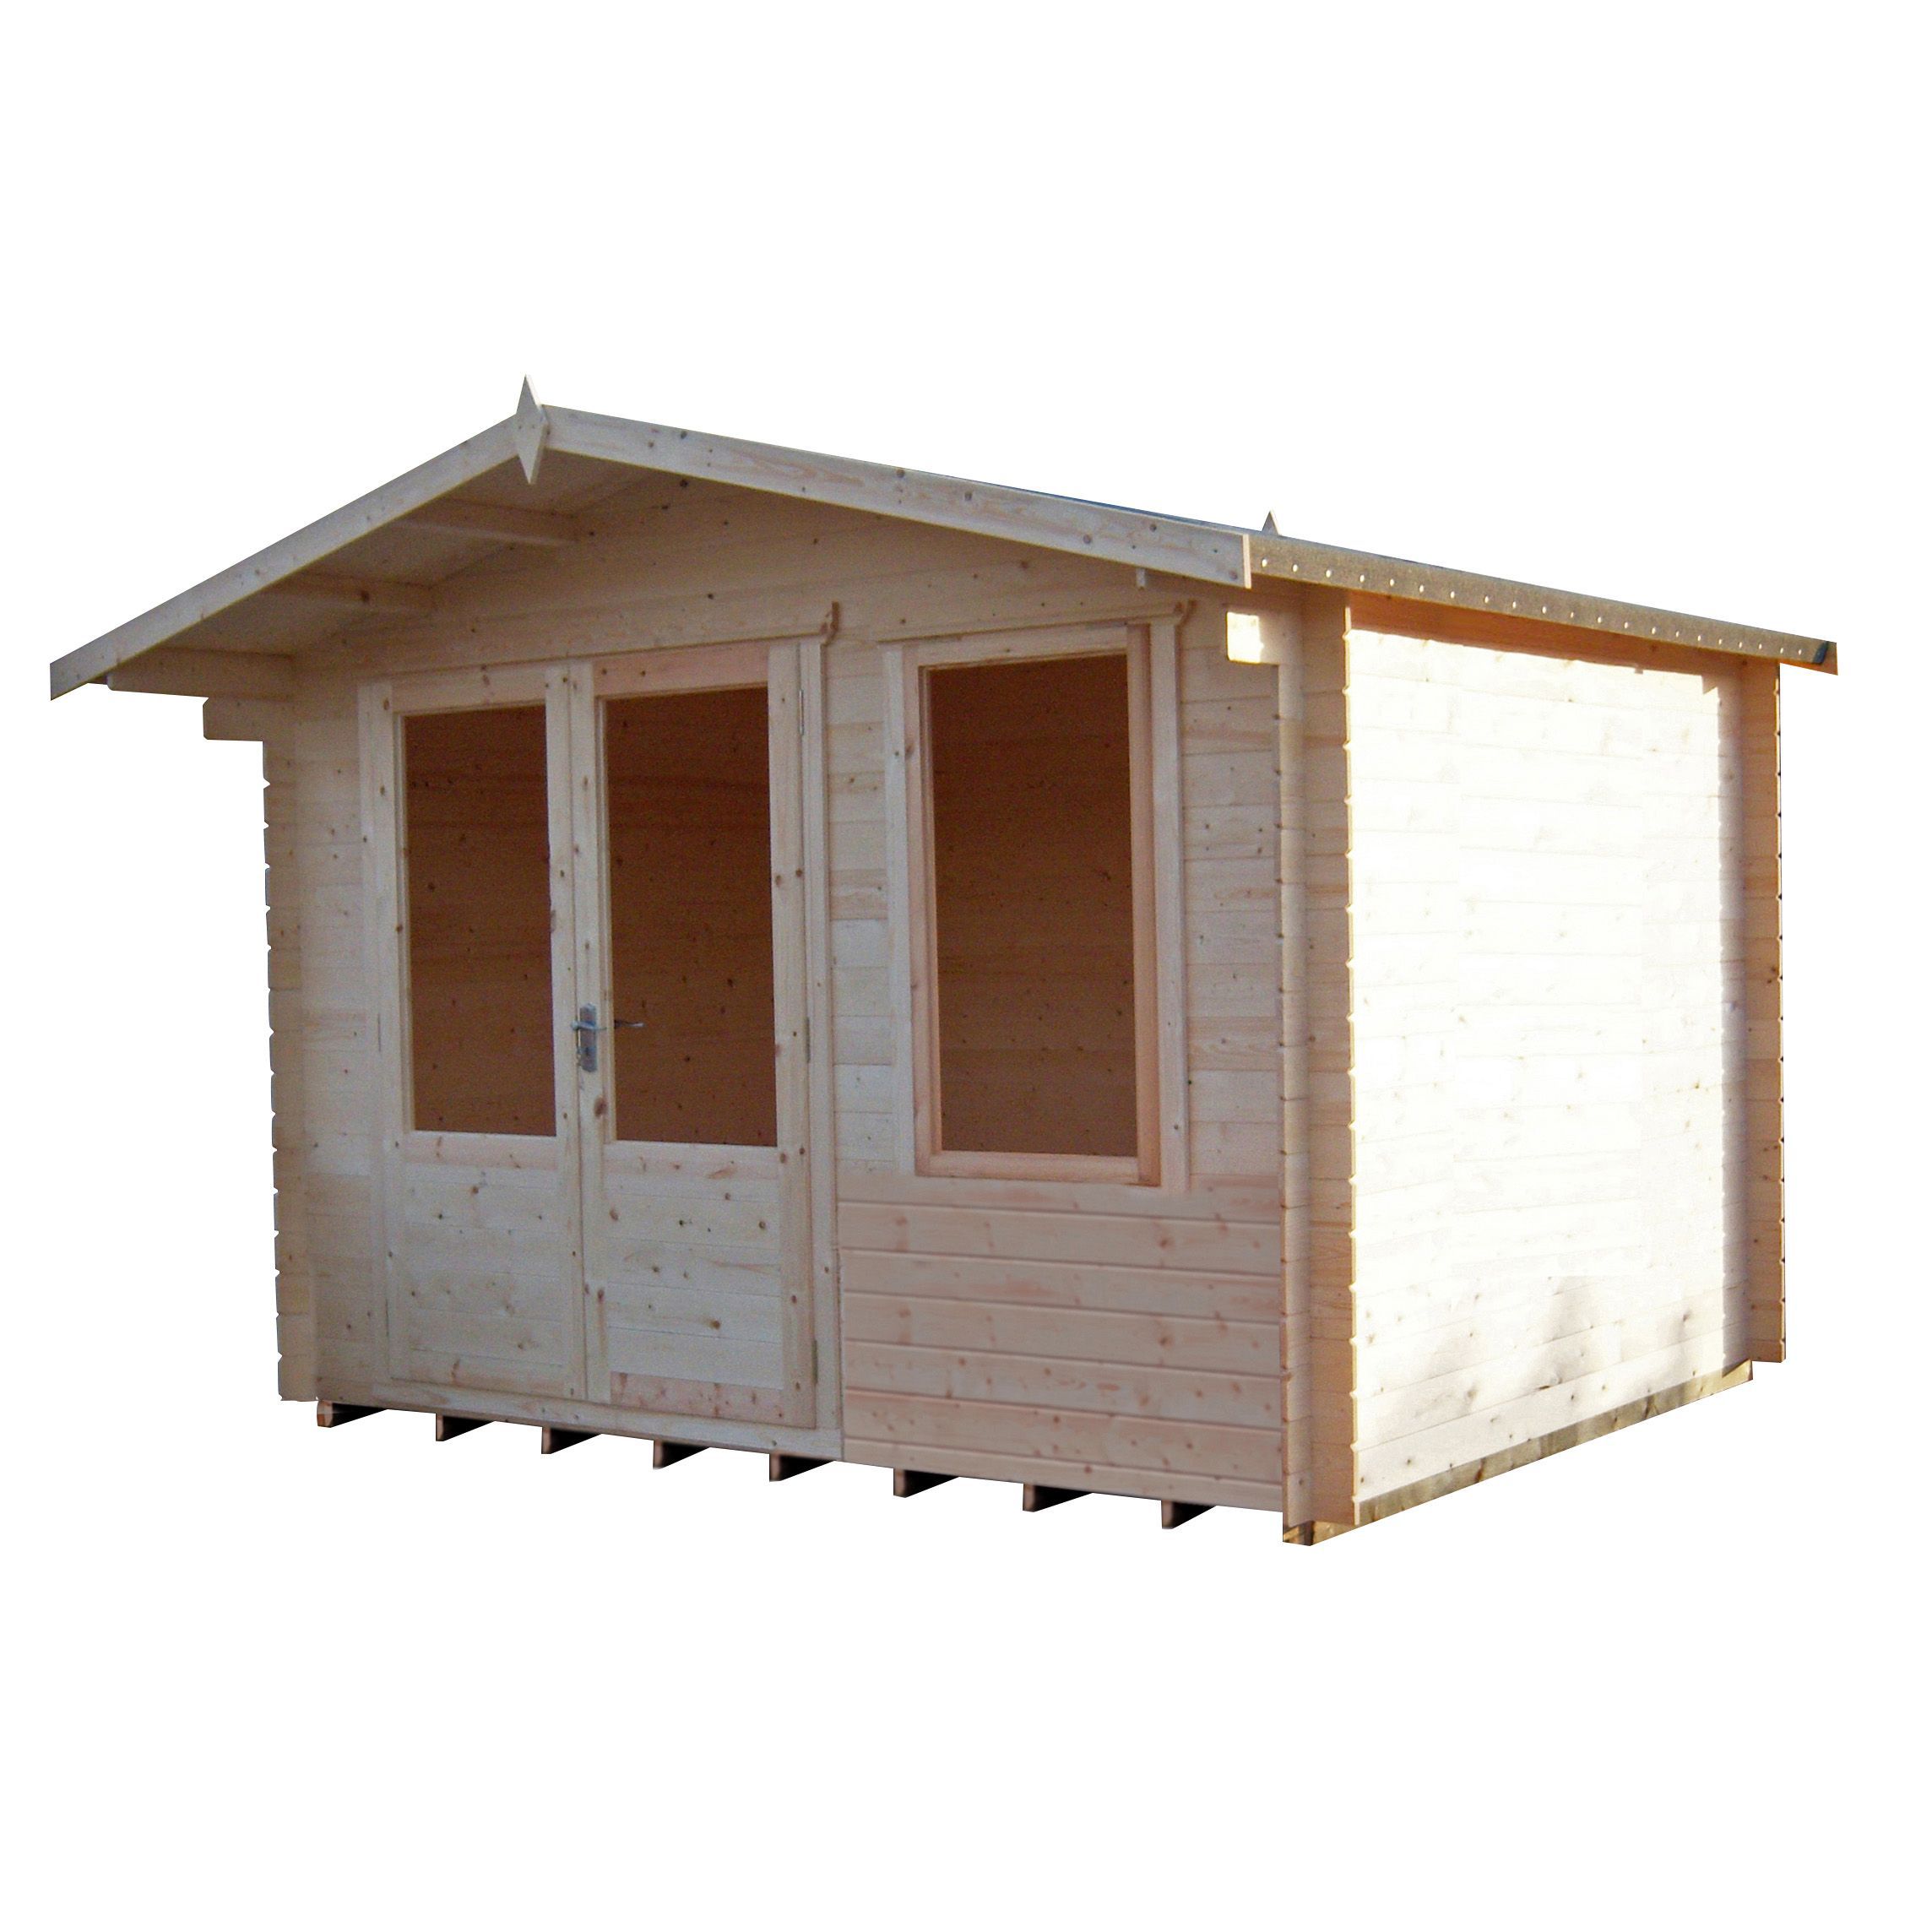 Shire Berryfield 11x8 Apex Tongue & groove Wooden Cabin - Assembly service included